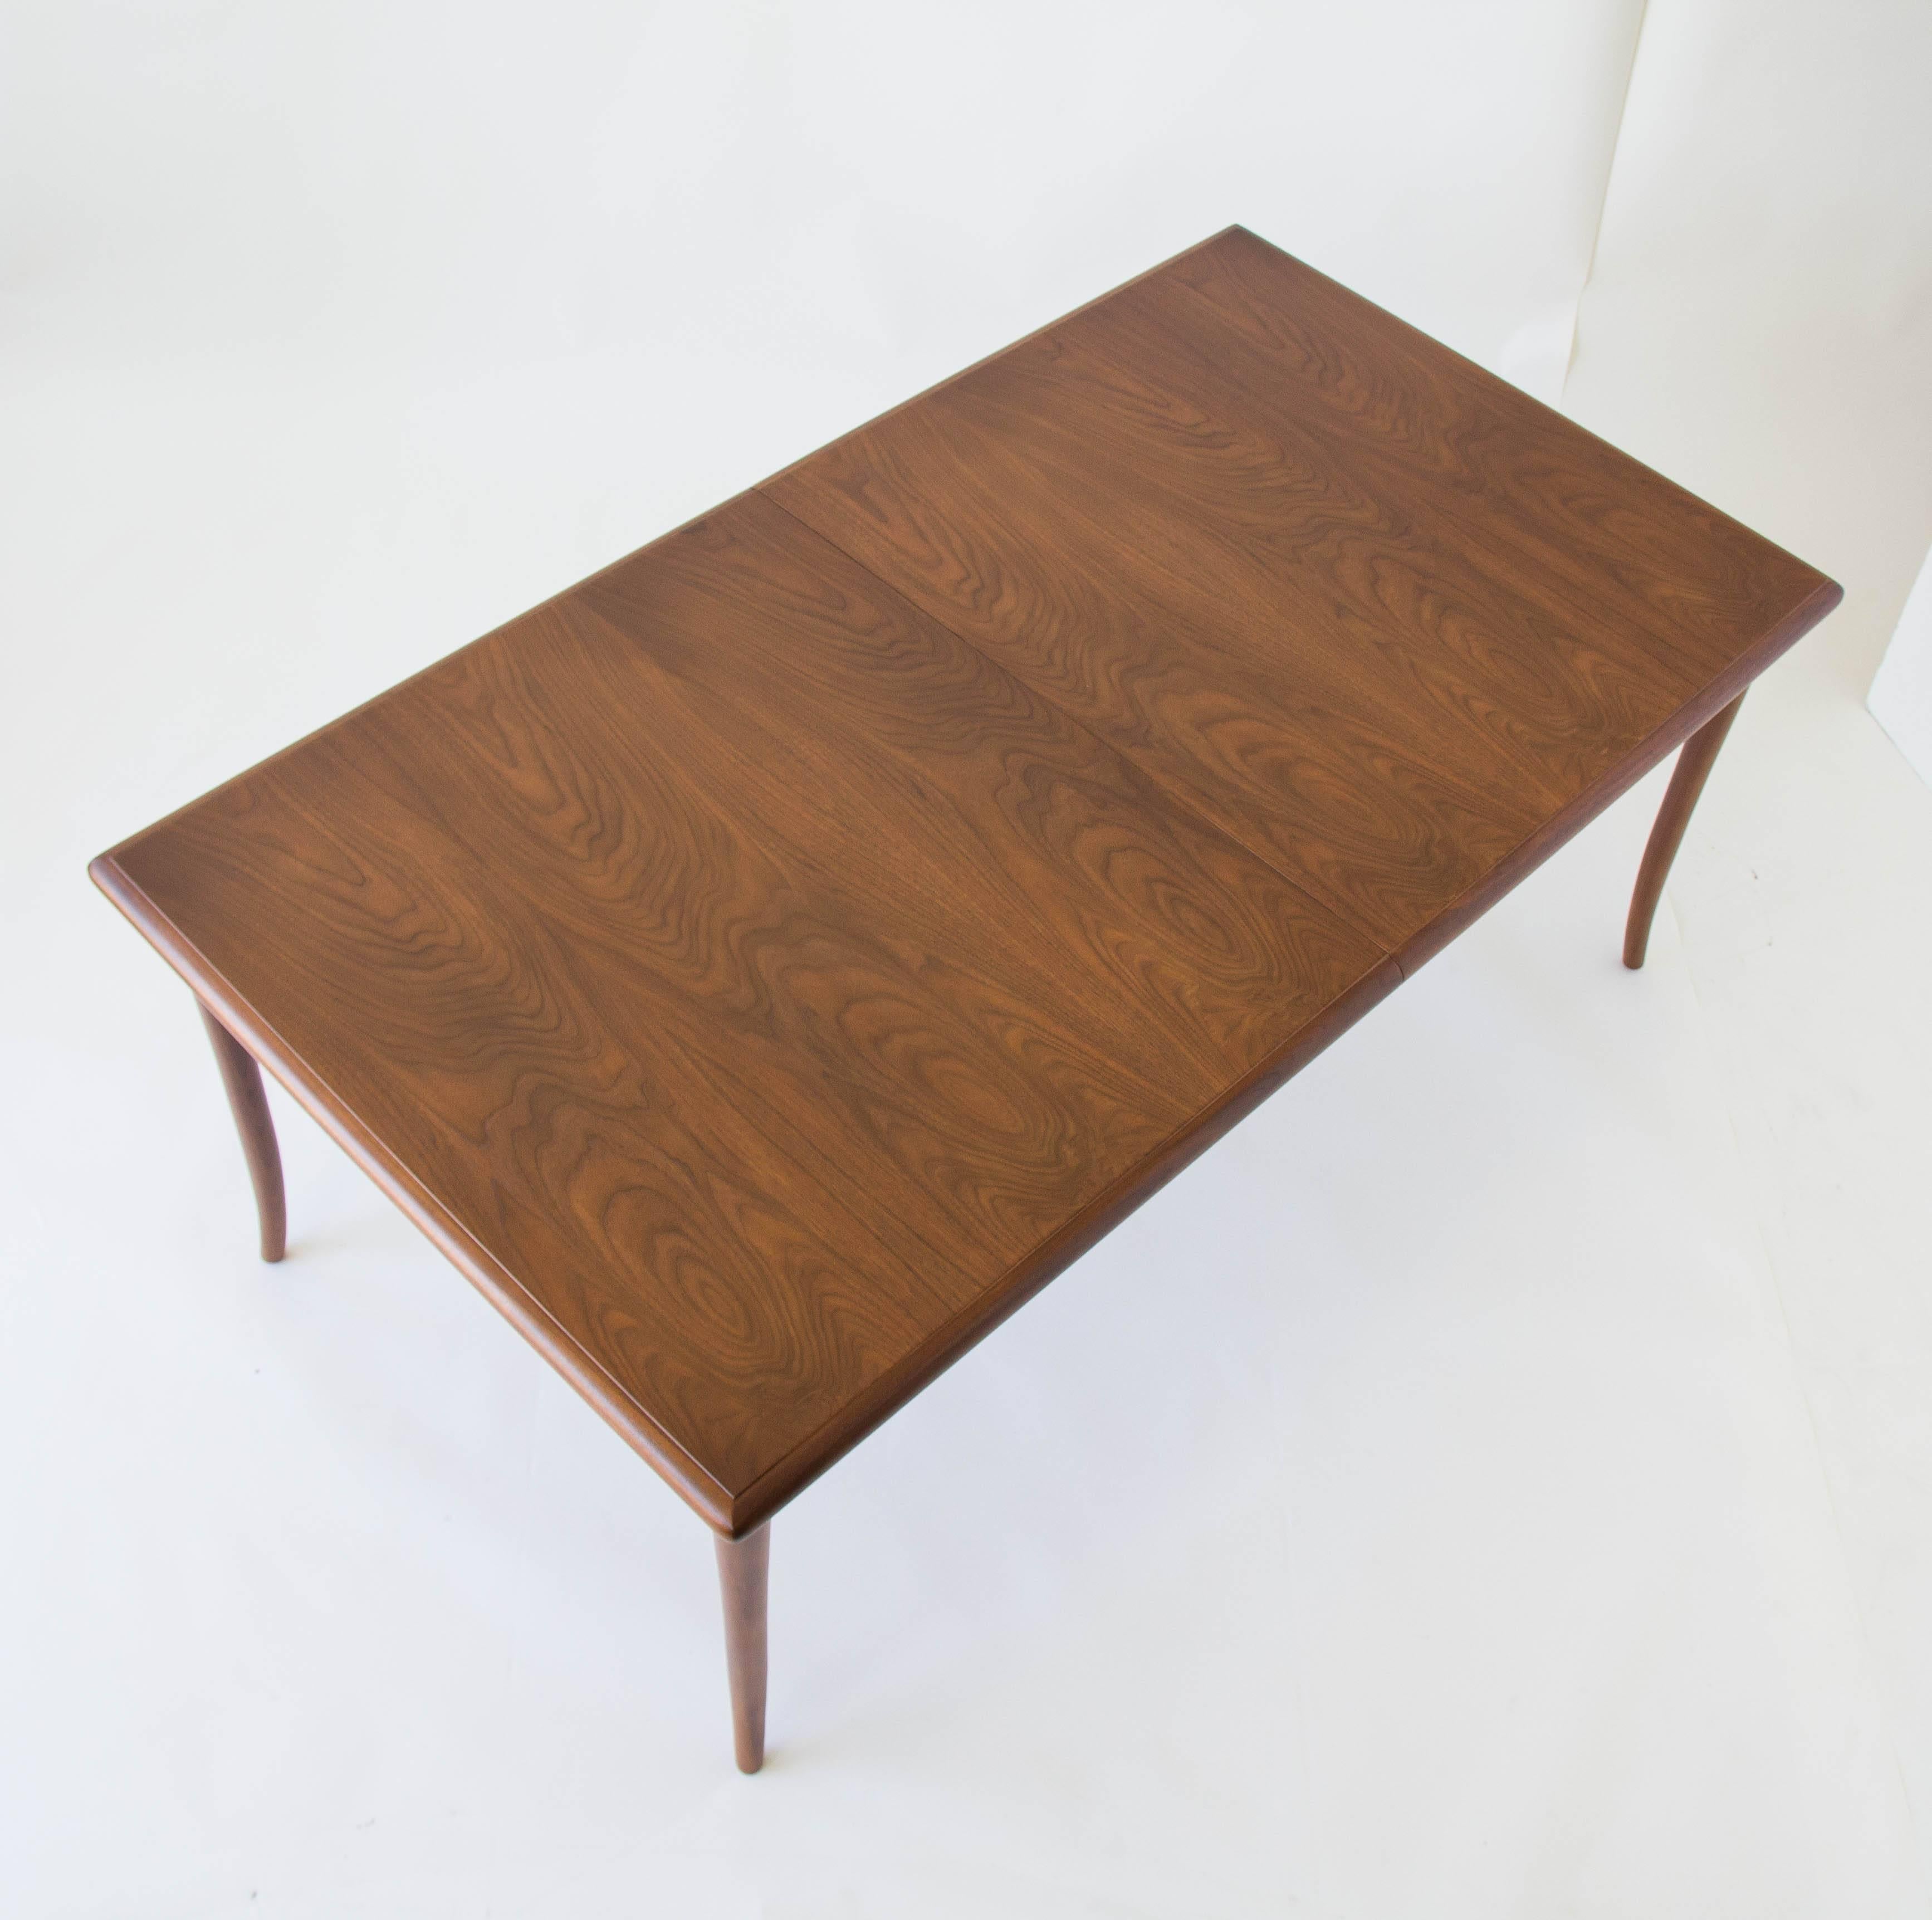 American made dining table by T. H. Robsjohn-Gibbings for Widdicomb showcasing beautiful walnut woodgrain. Deceptively simple design with a subtle raised tabletop, rounded edges and solid sabre legs that accommodates two insert leaves. Each walnut